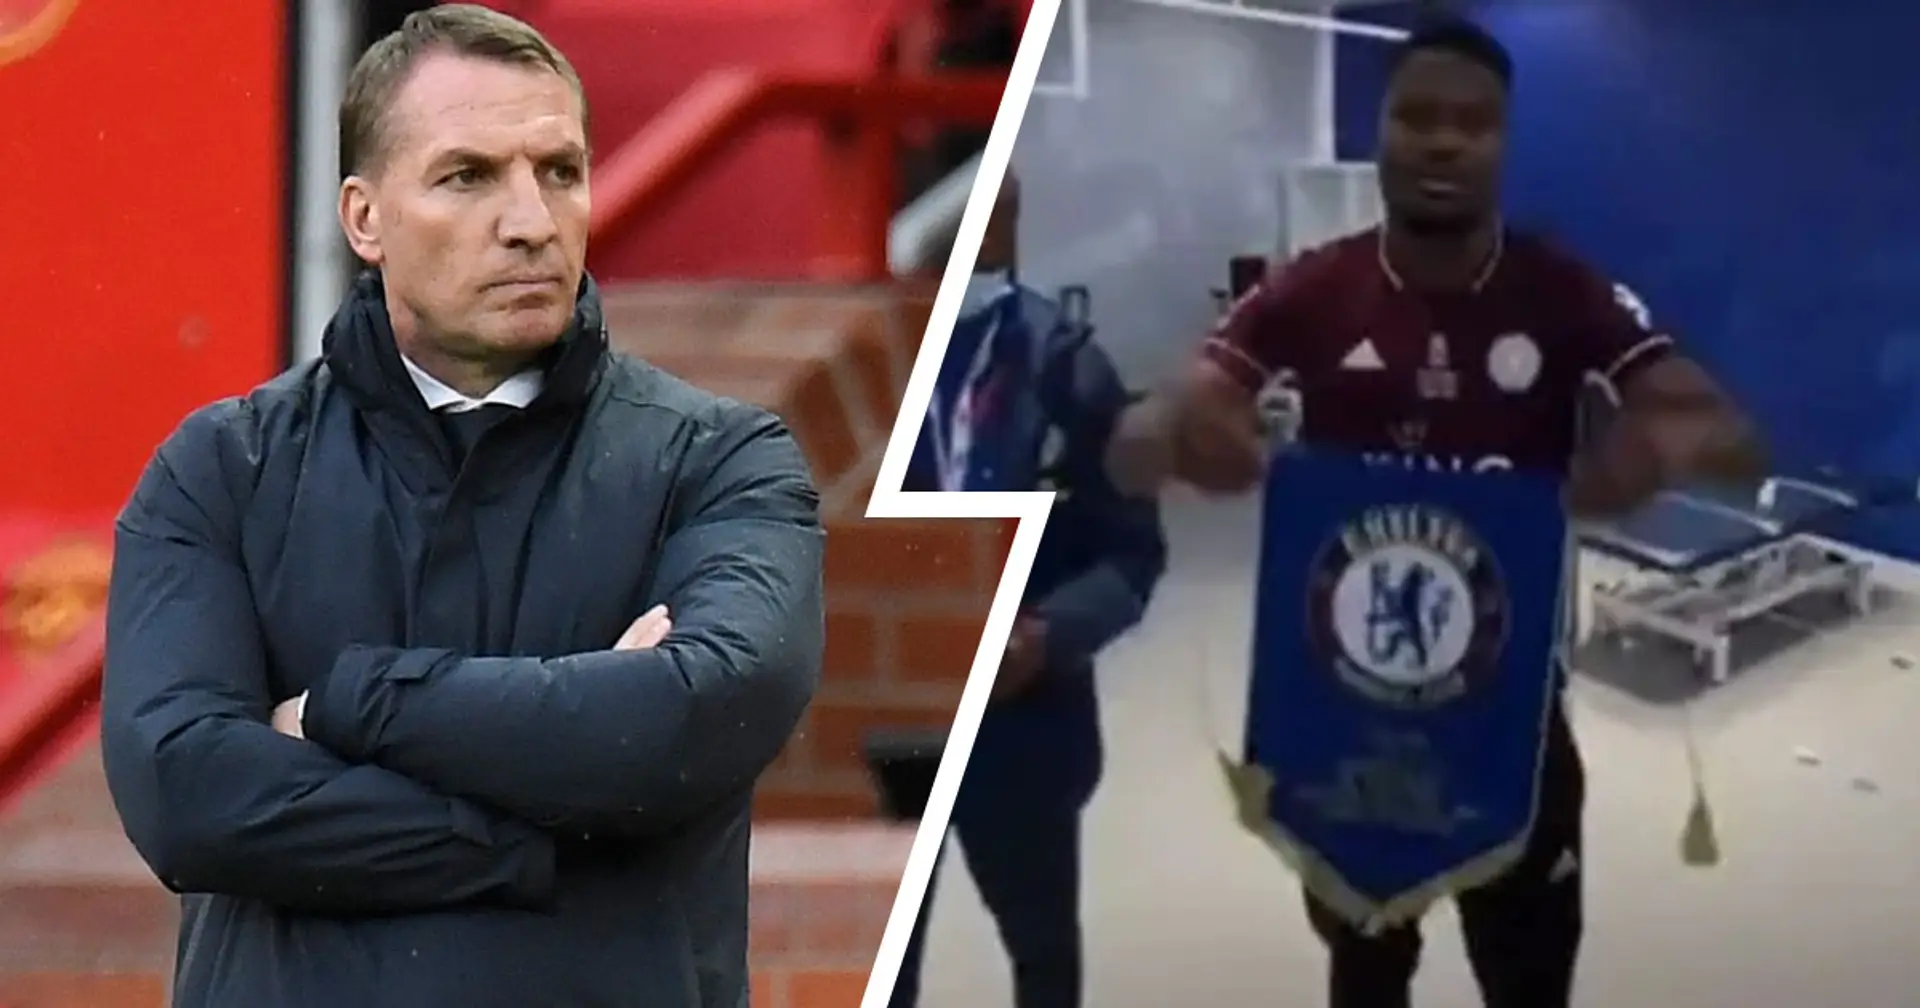 Leicester City apologizes to Chelsea for Daniel Amartey's disrespectful act of throwing away banner